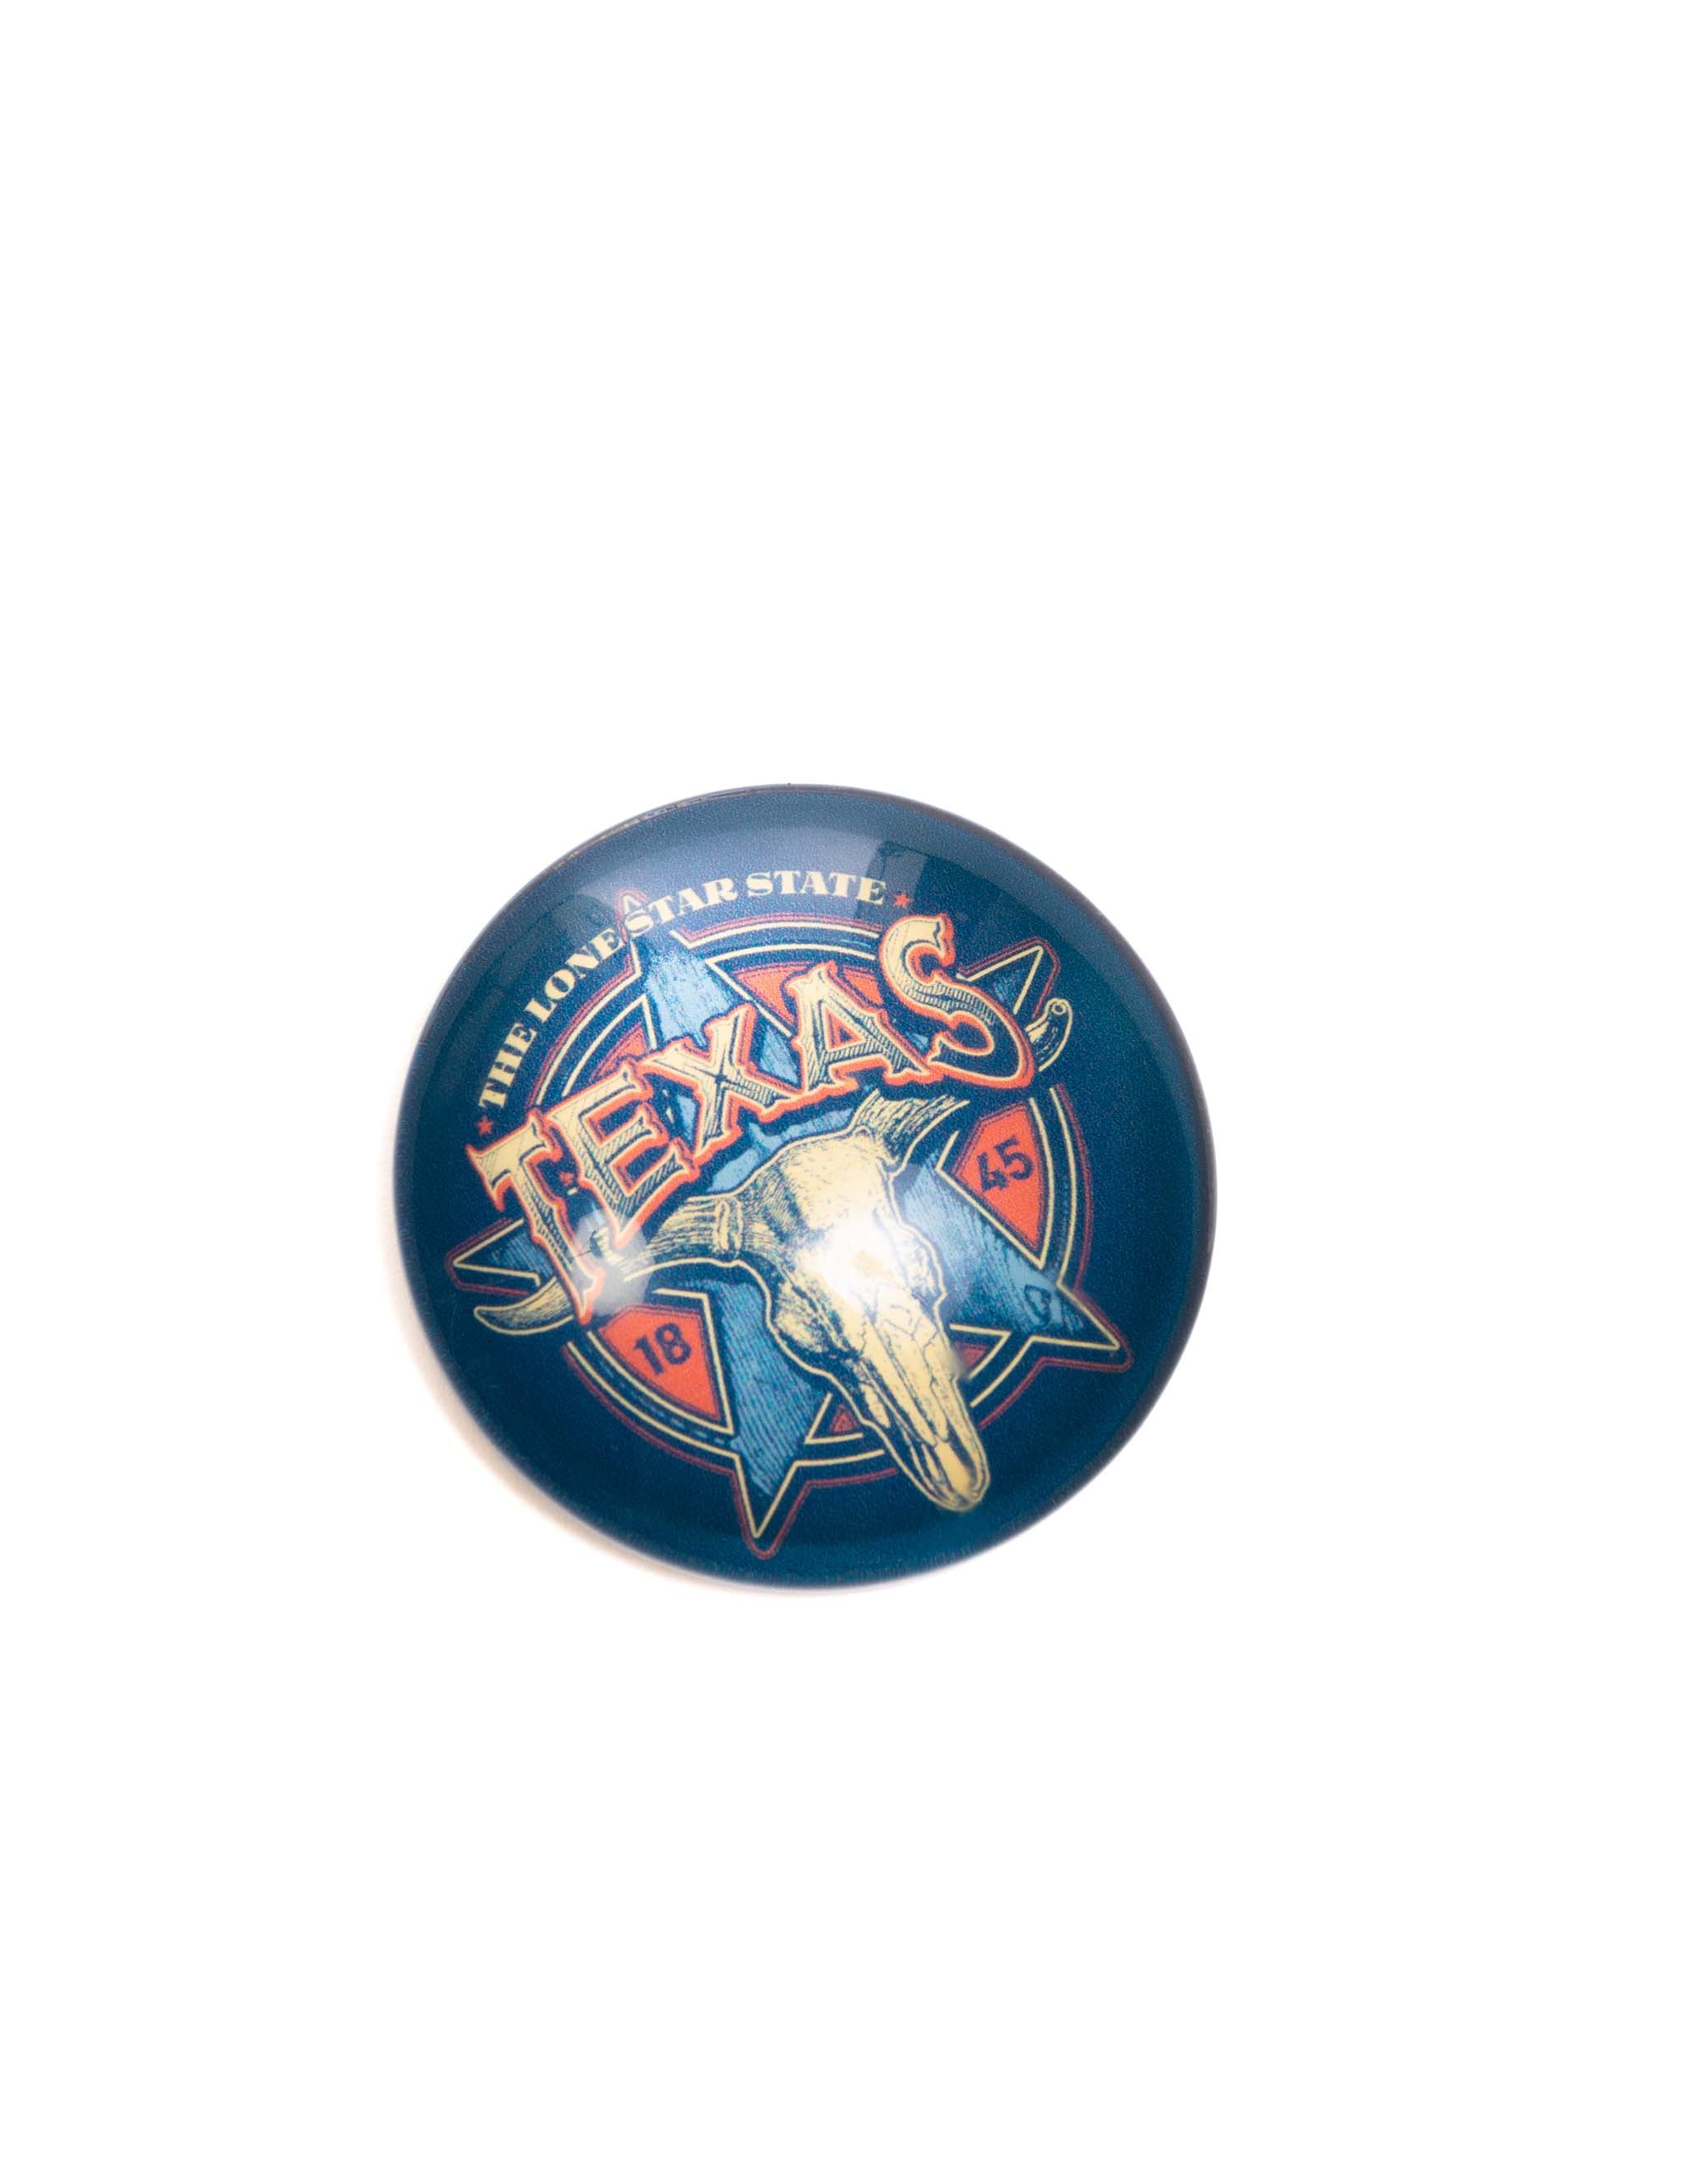 Texas Lone Star Steer Dome Magnet